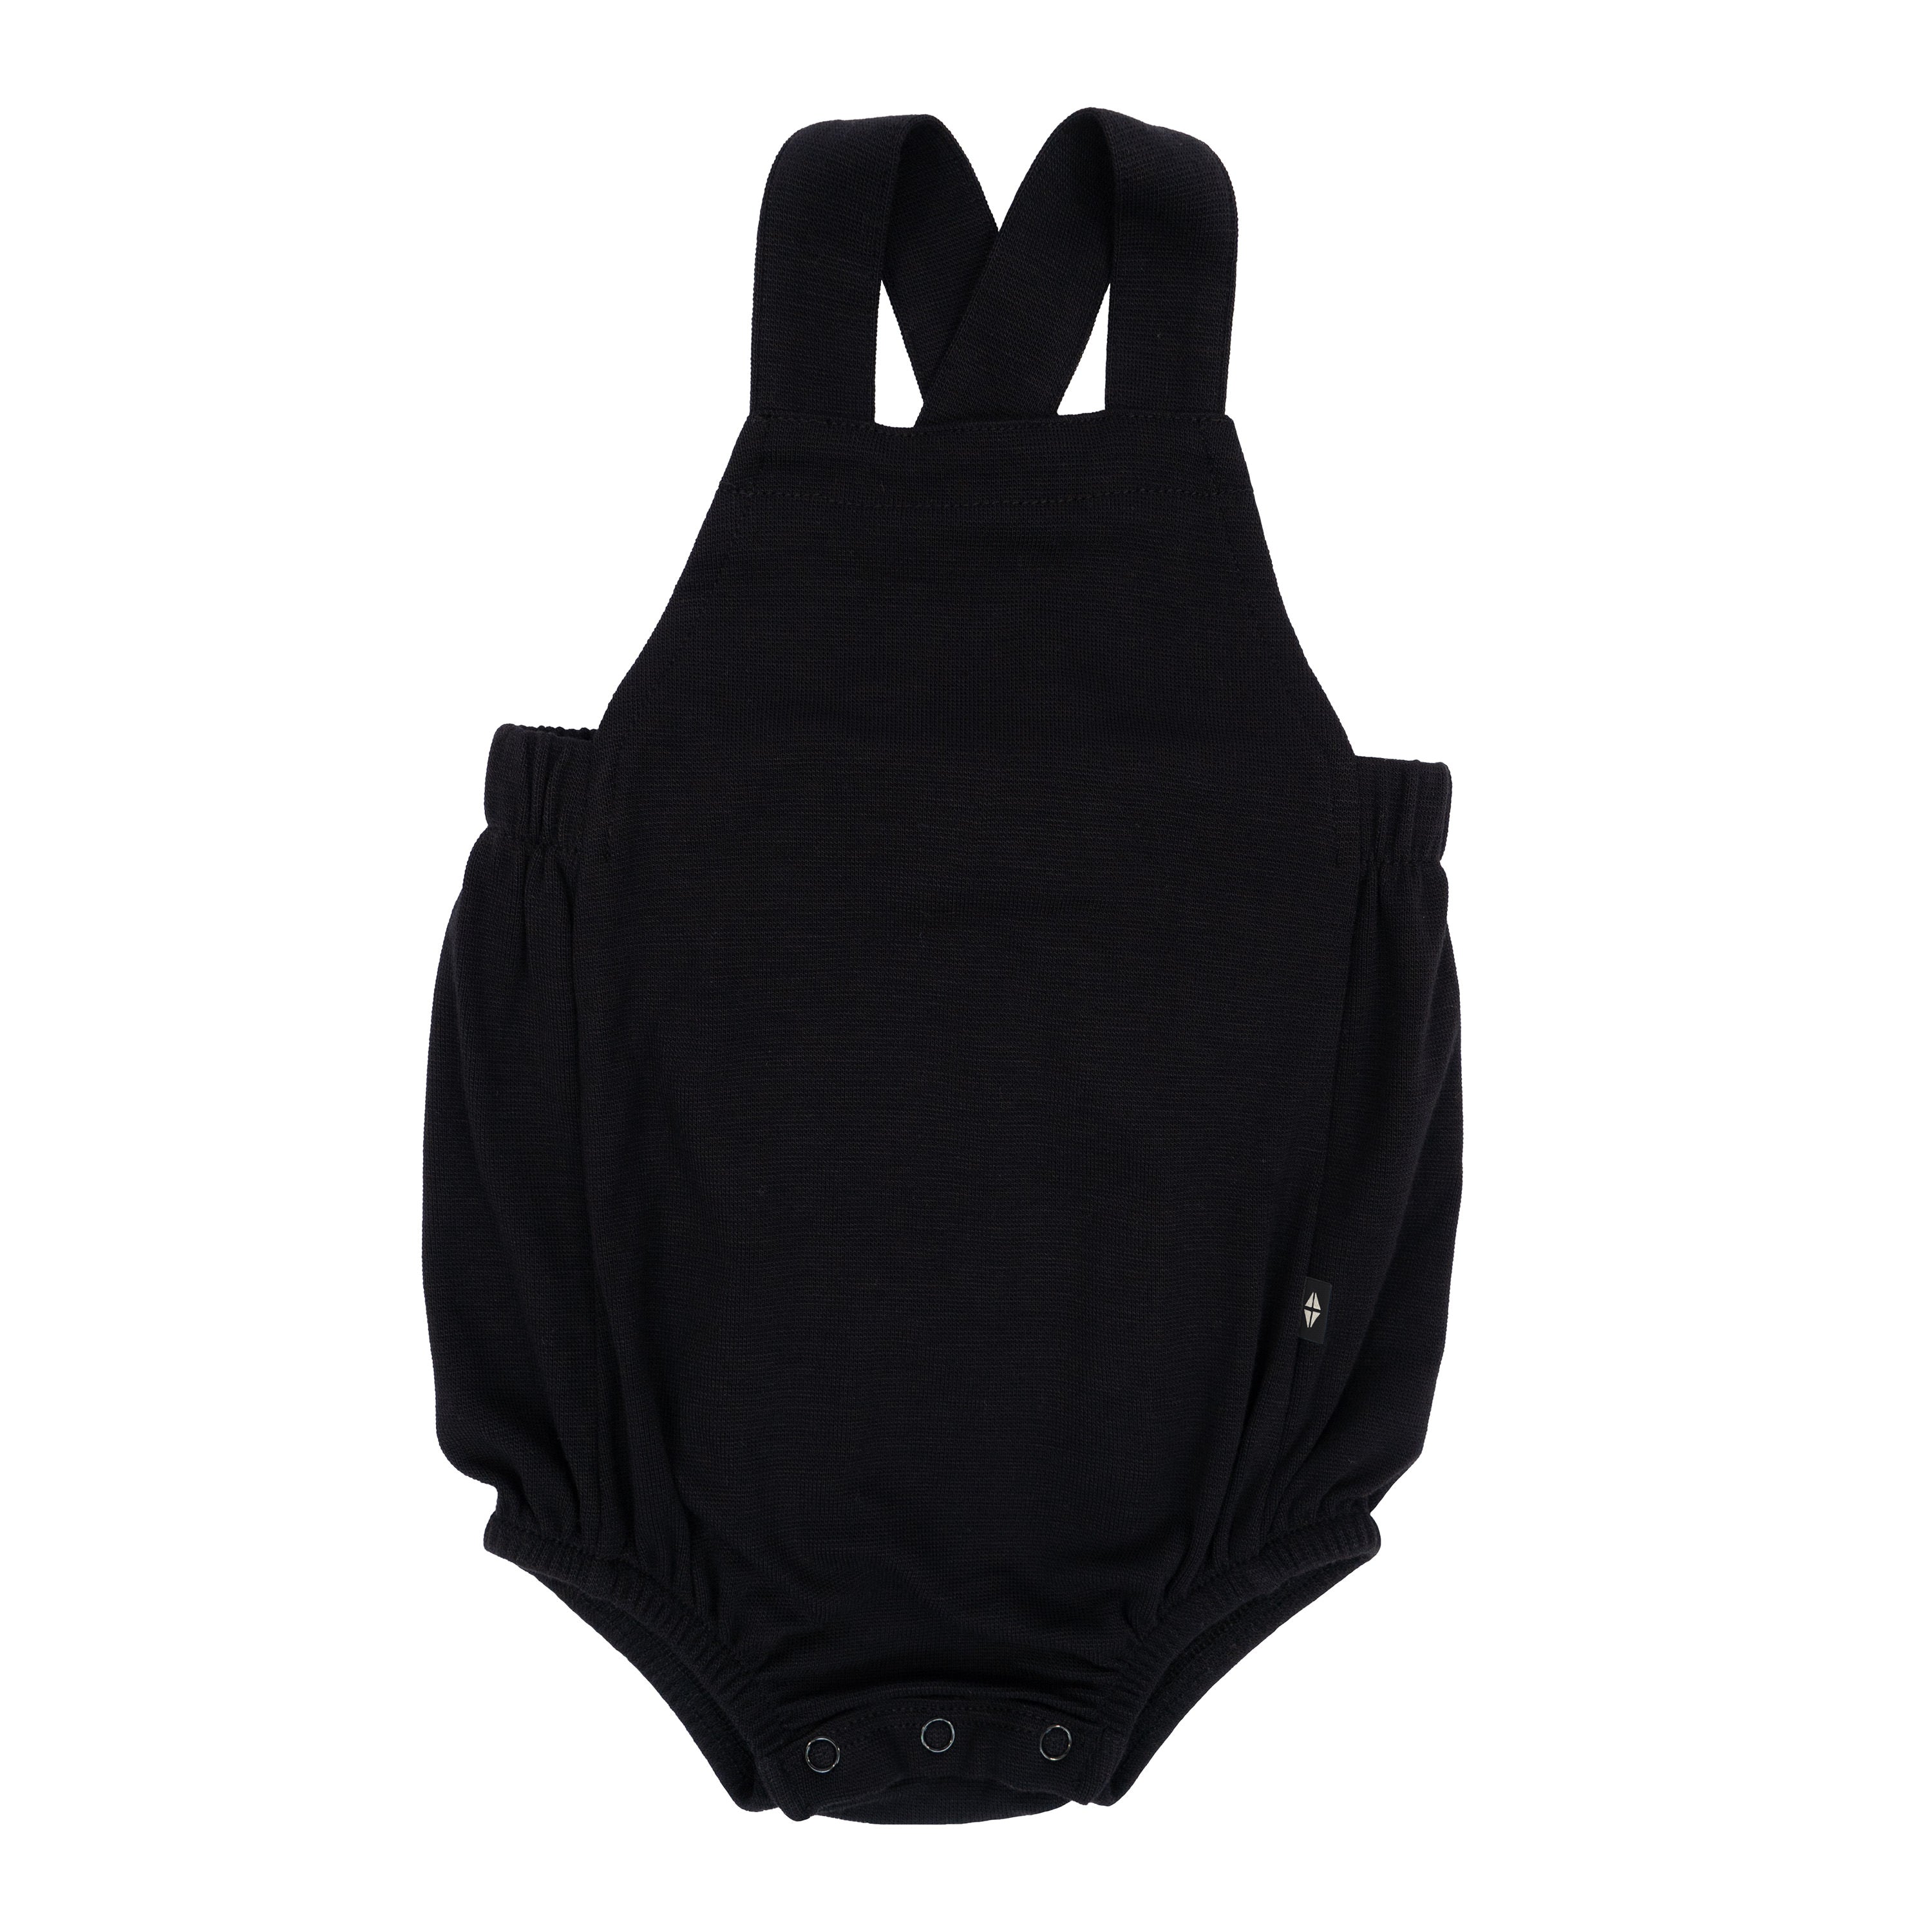 Bamboo Jersey Bubble Overall in Midnight